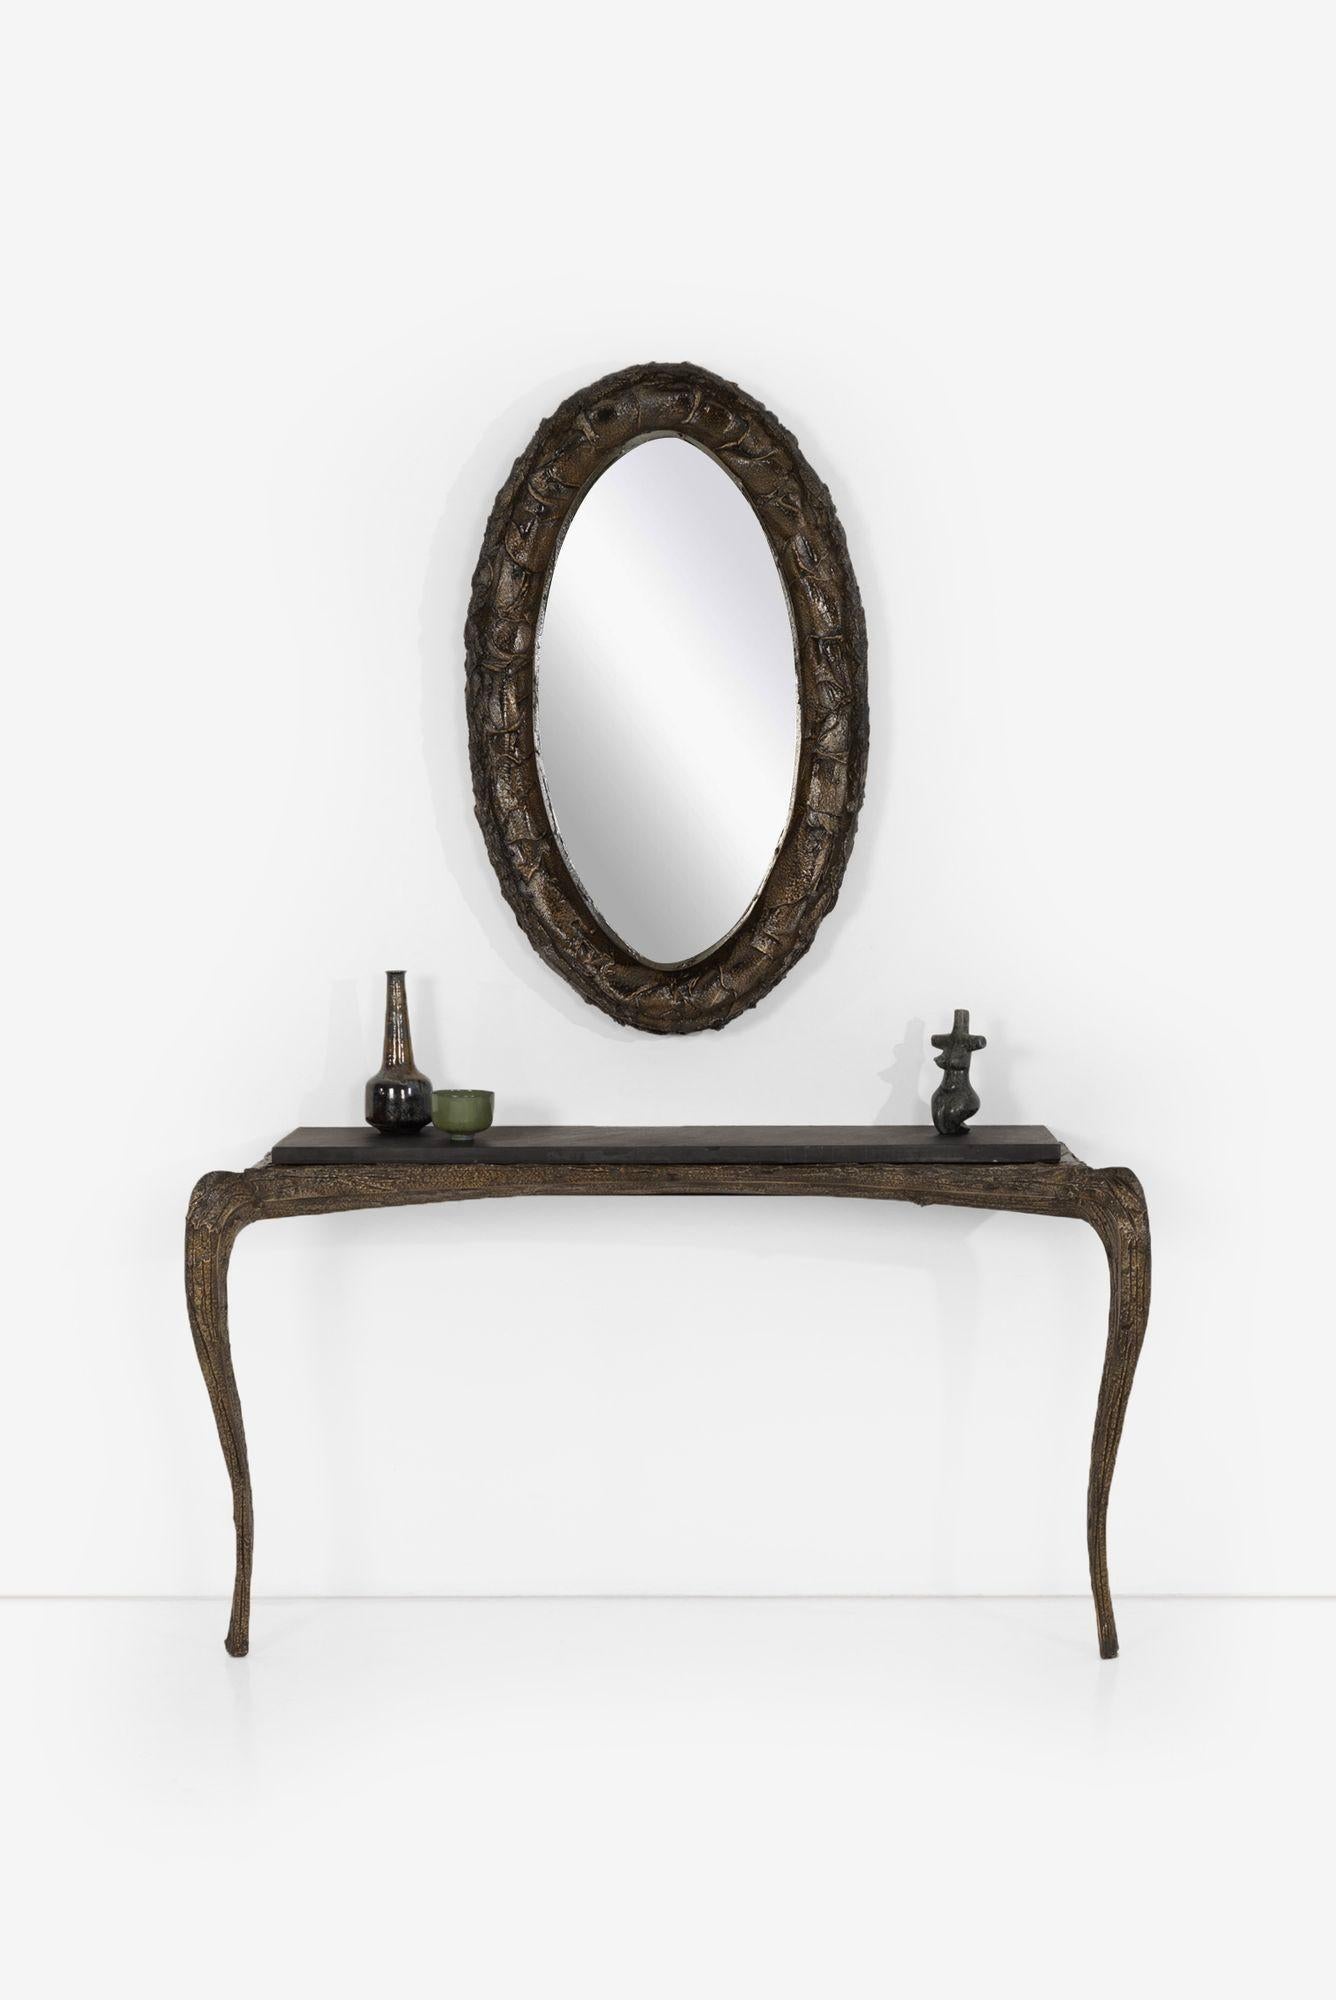 Paul Evans Studio Mirror and Console Suite;
Rare Sculptured Bronze Metal Console Table with slate top and Mirror from the 100 series, 1970c.
Comes with letter of authenticity from Dorsay Reading: Paul Evans Studio chief and closest